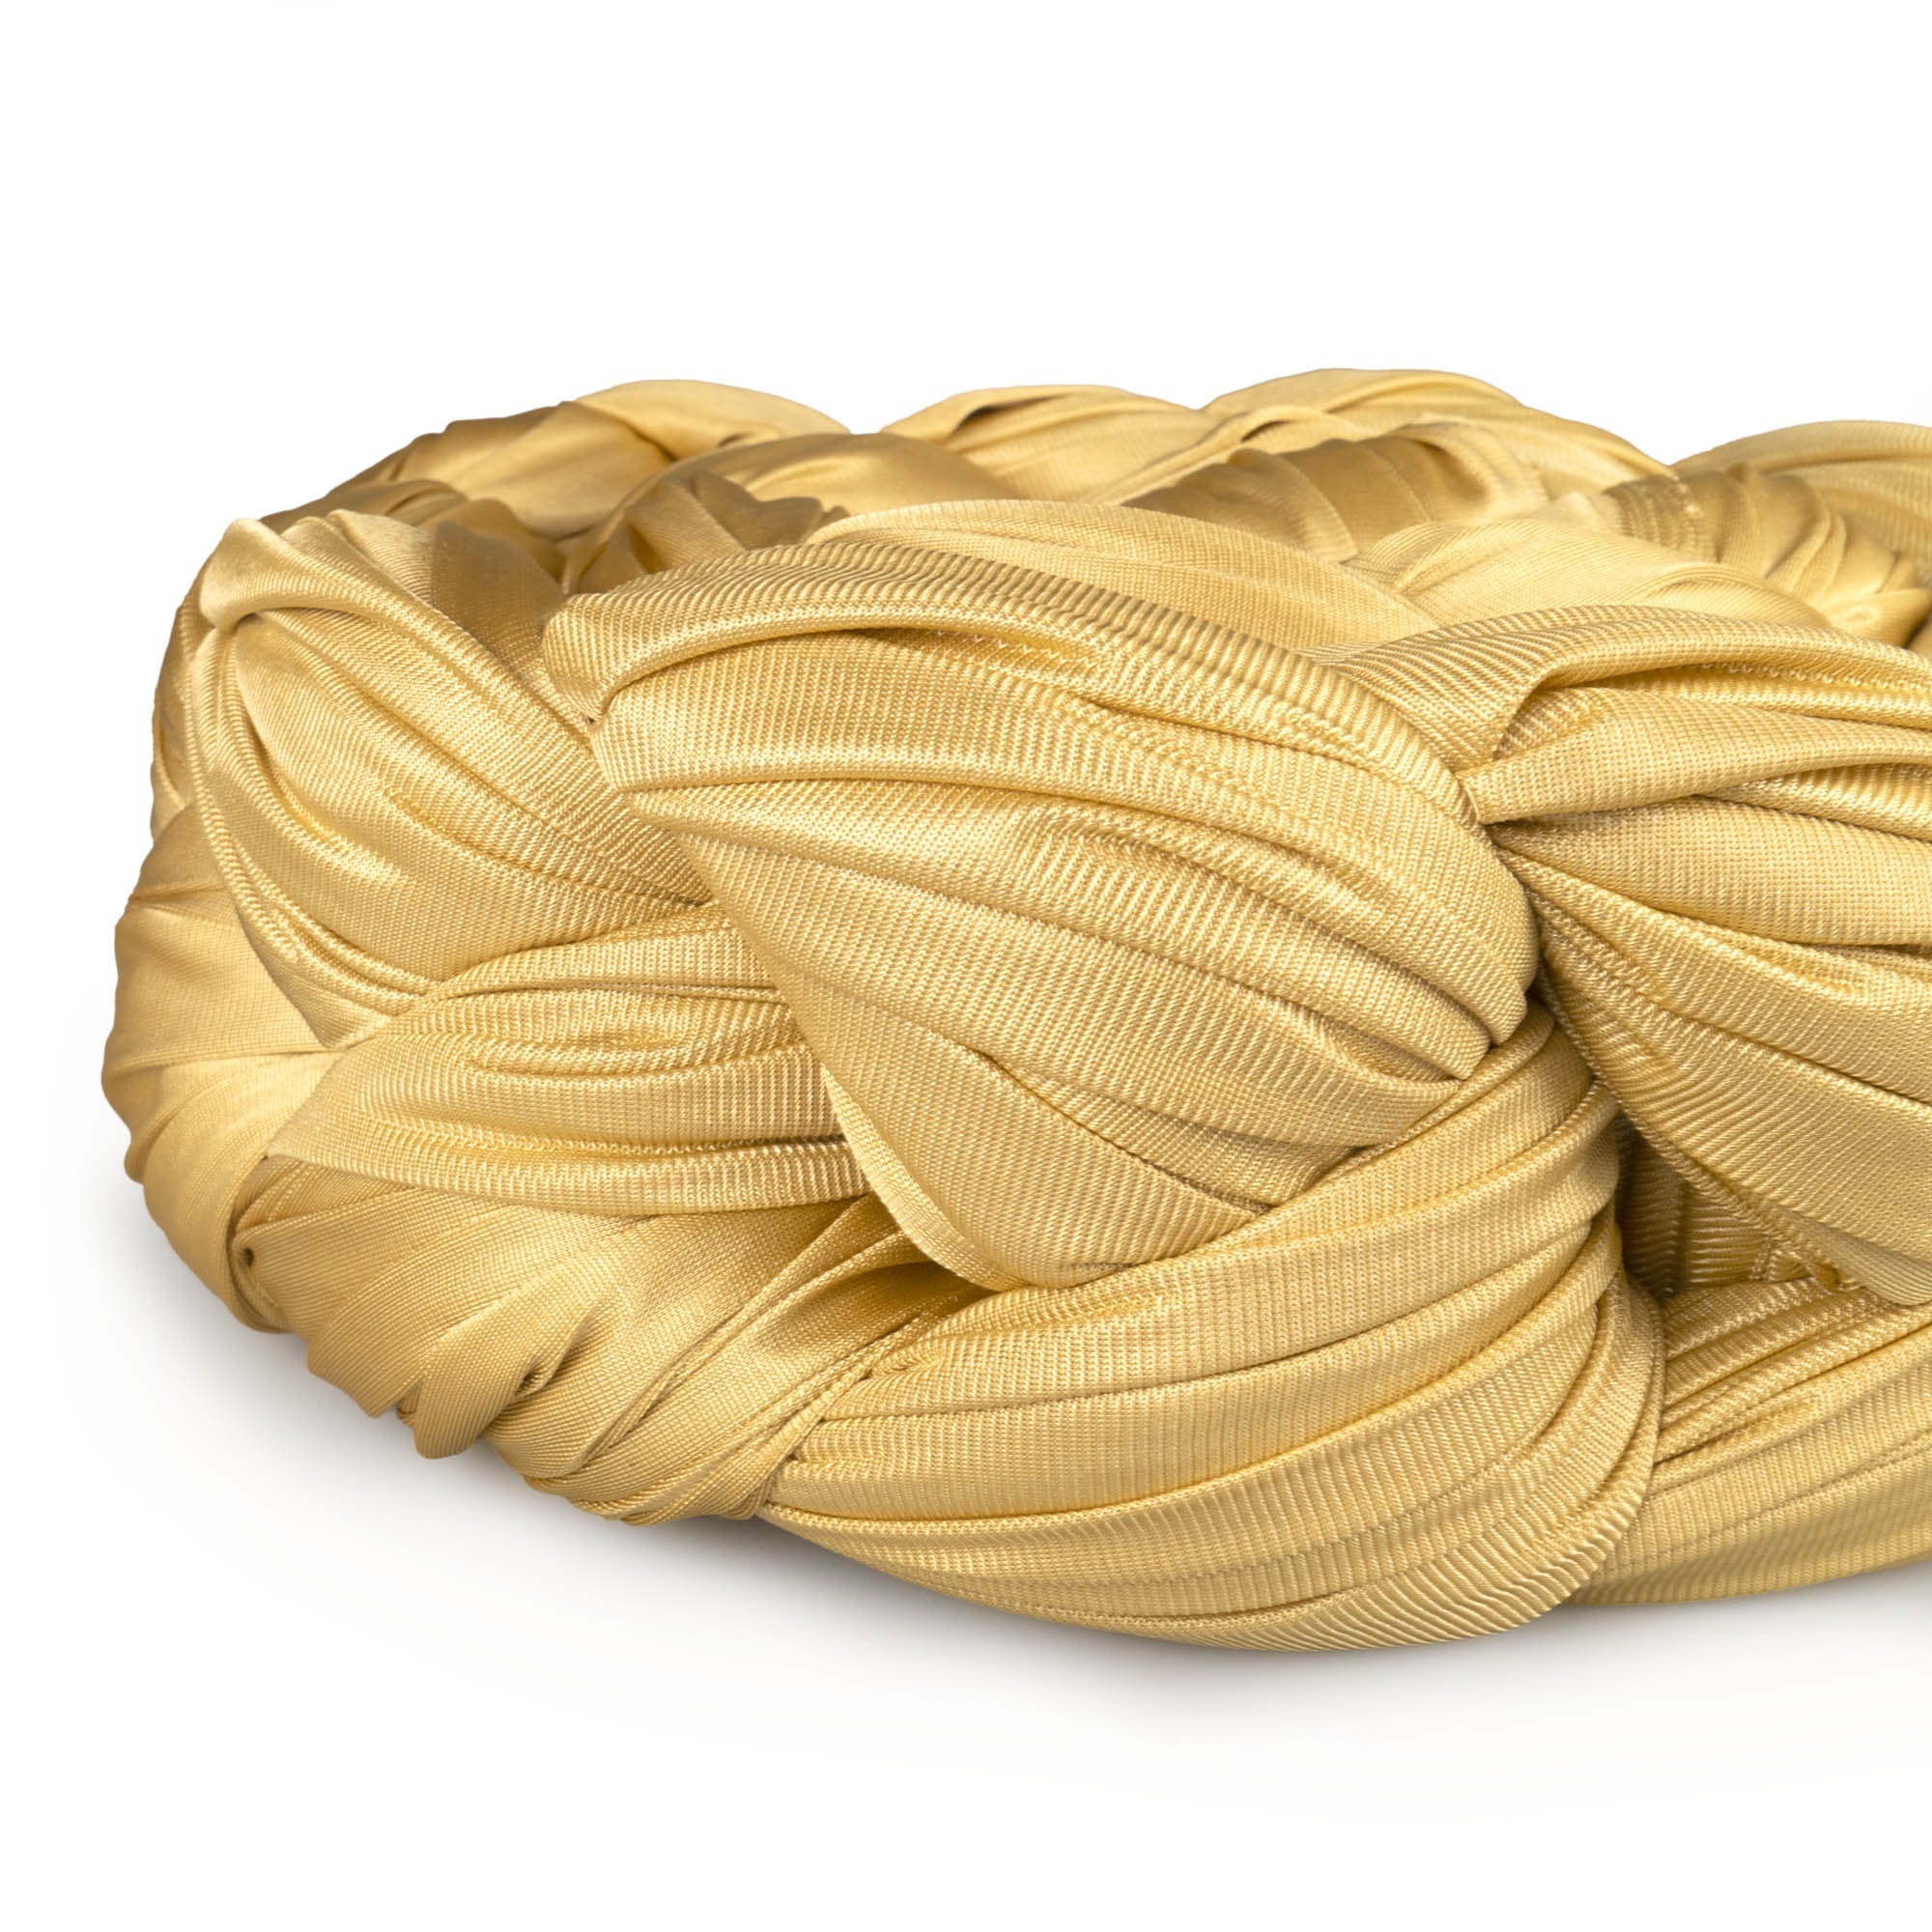 Gold silk coiled